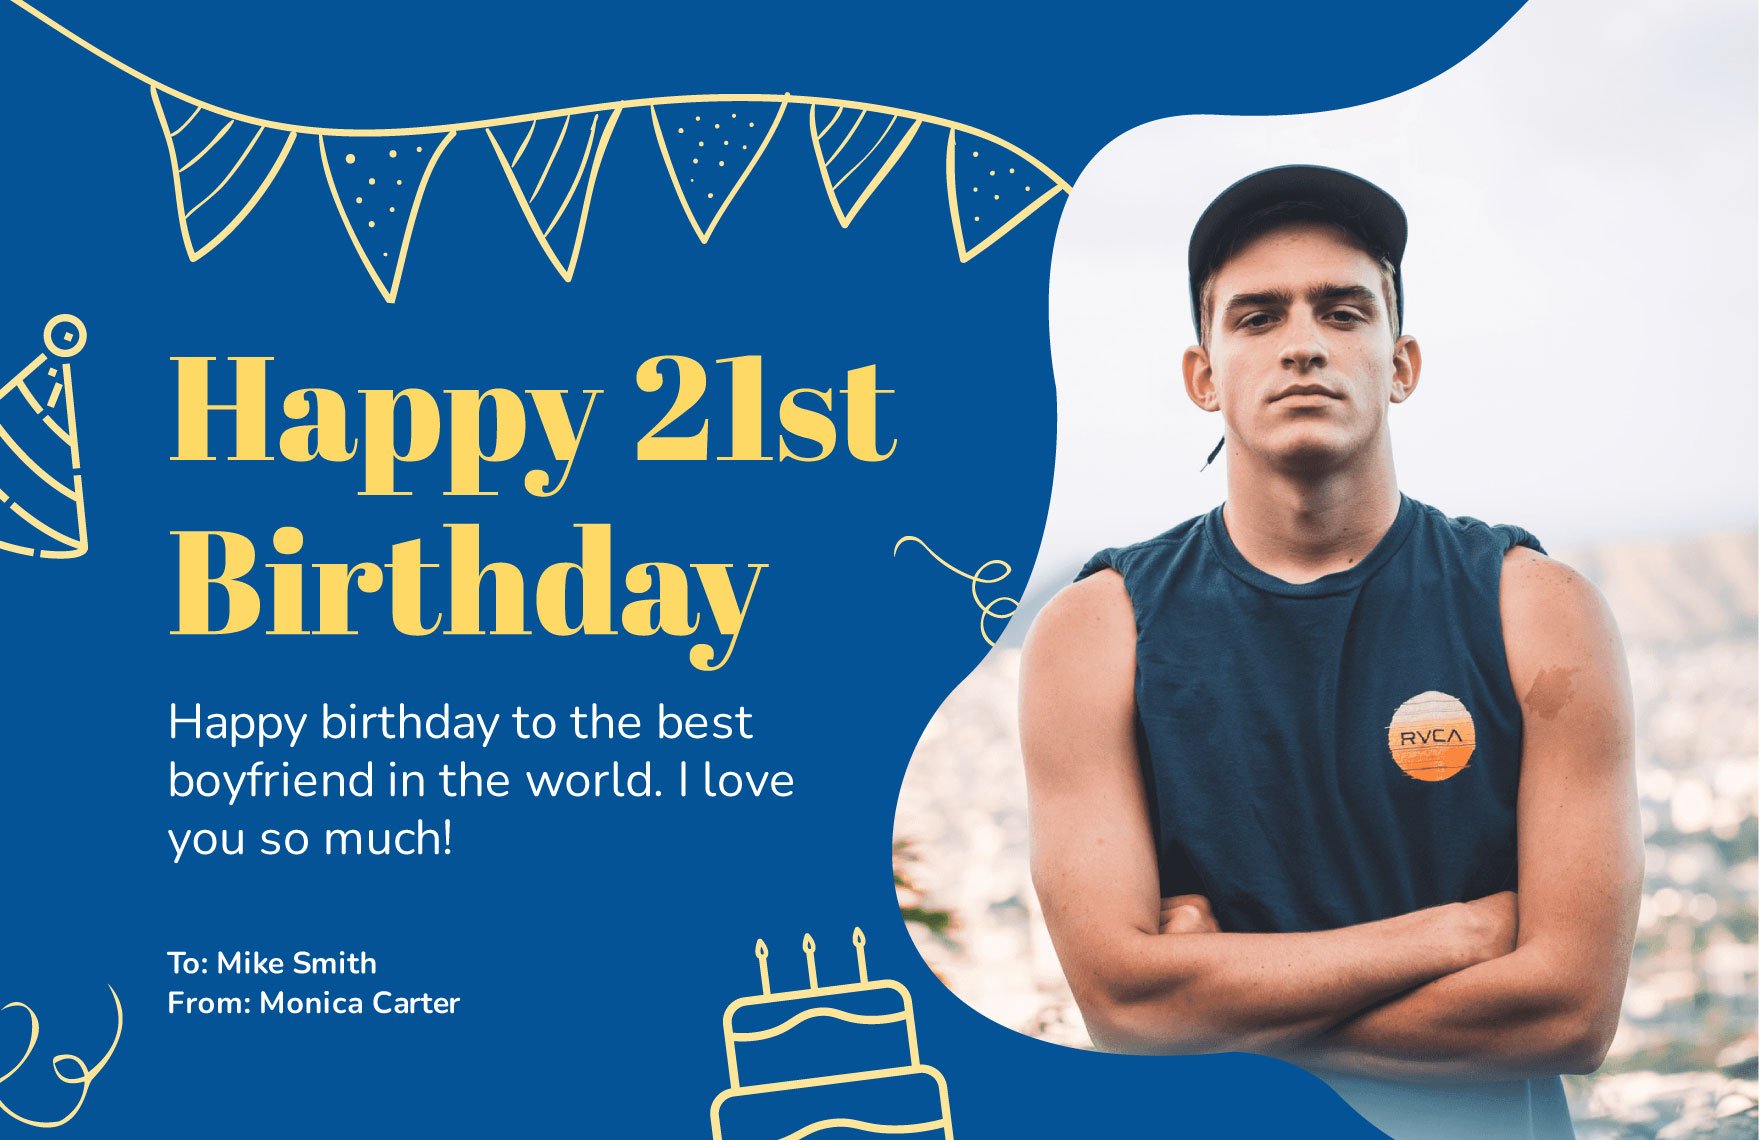 21st Birthday Card Template for Him